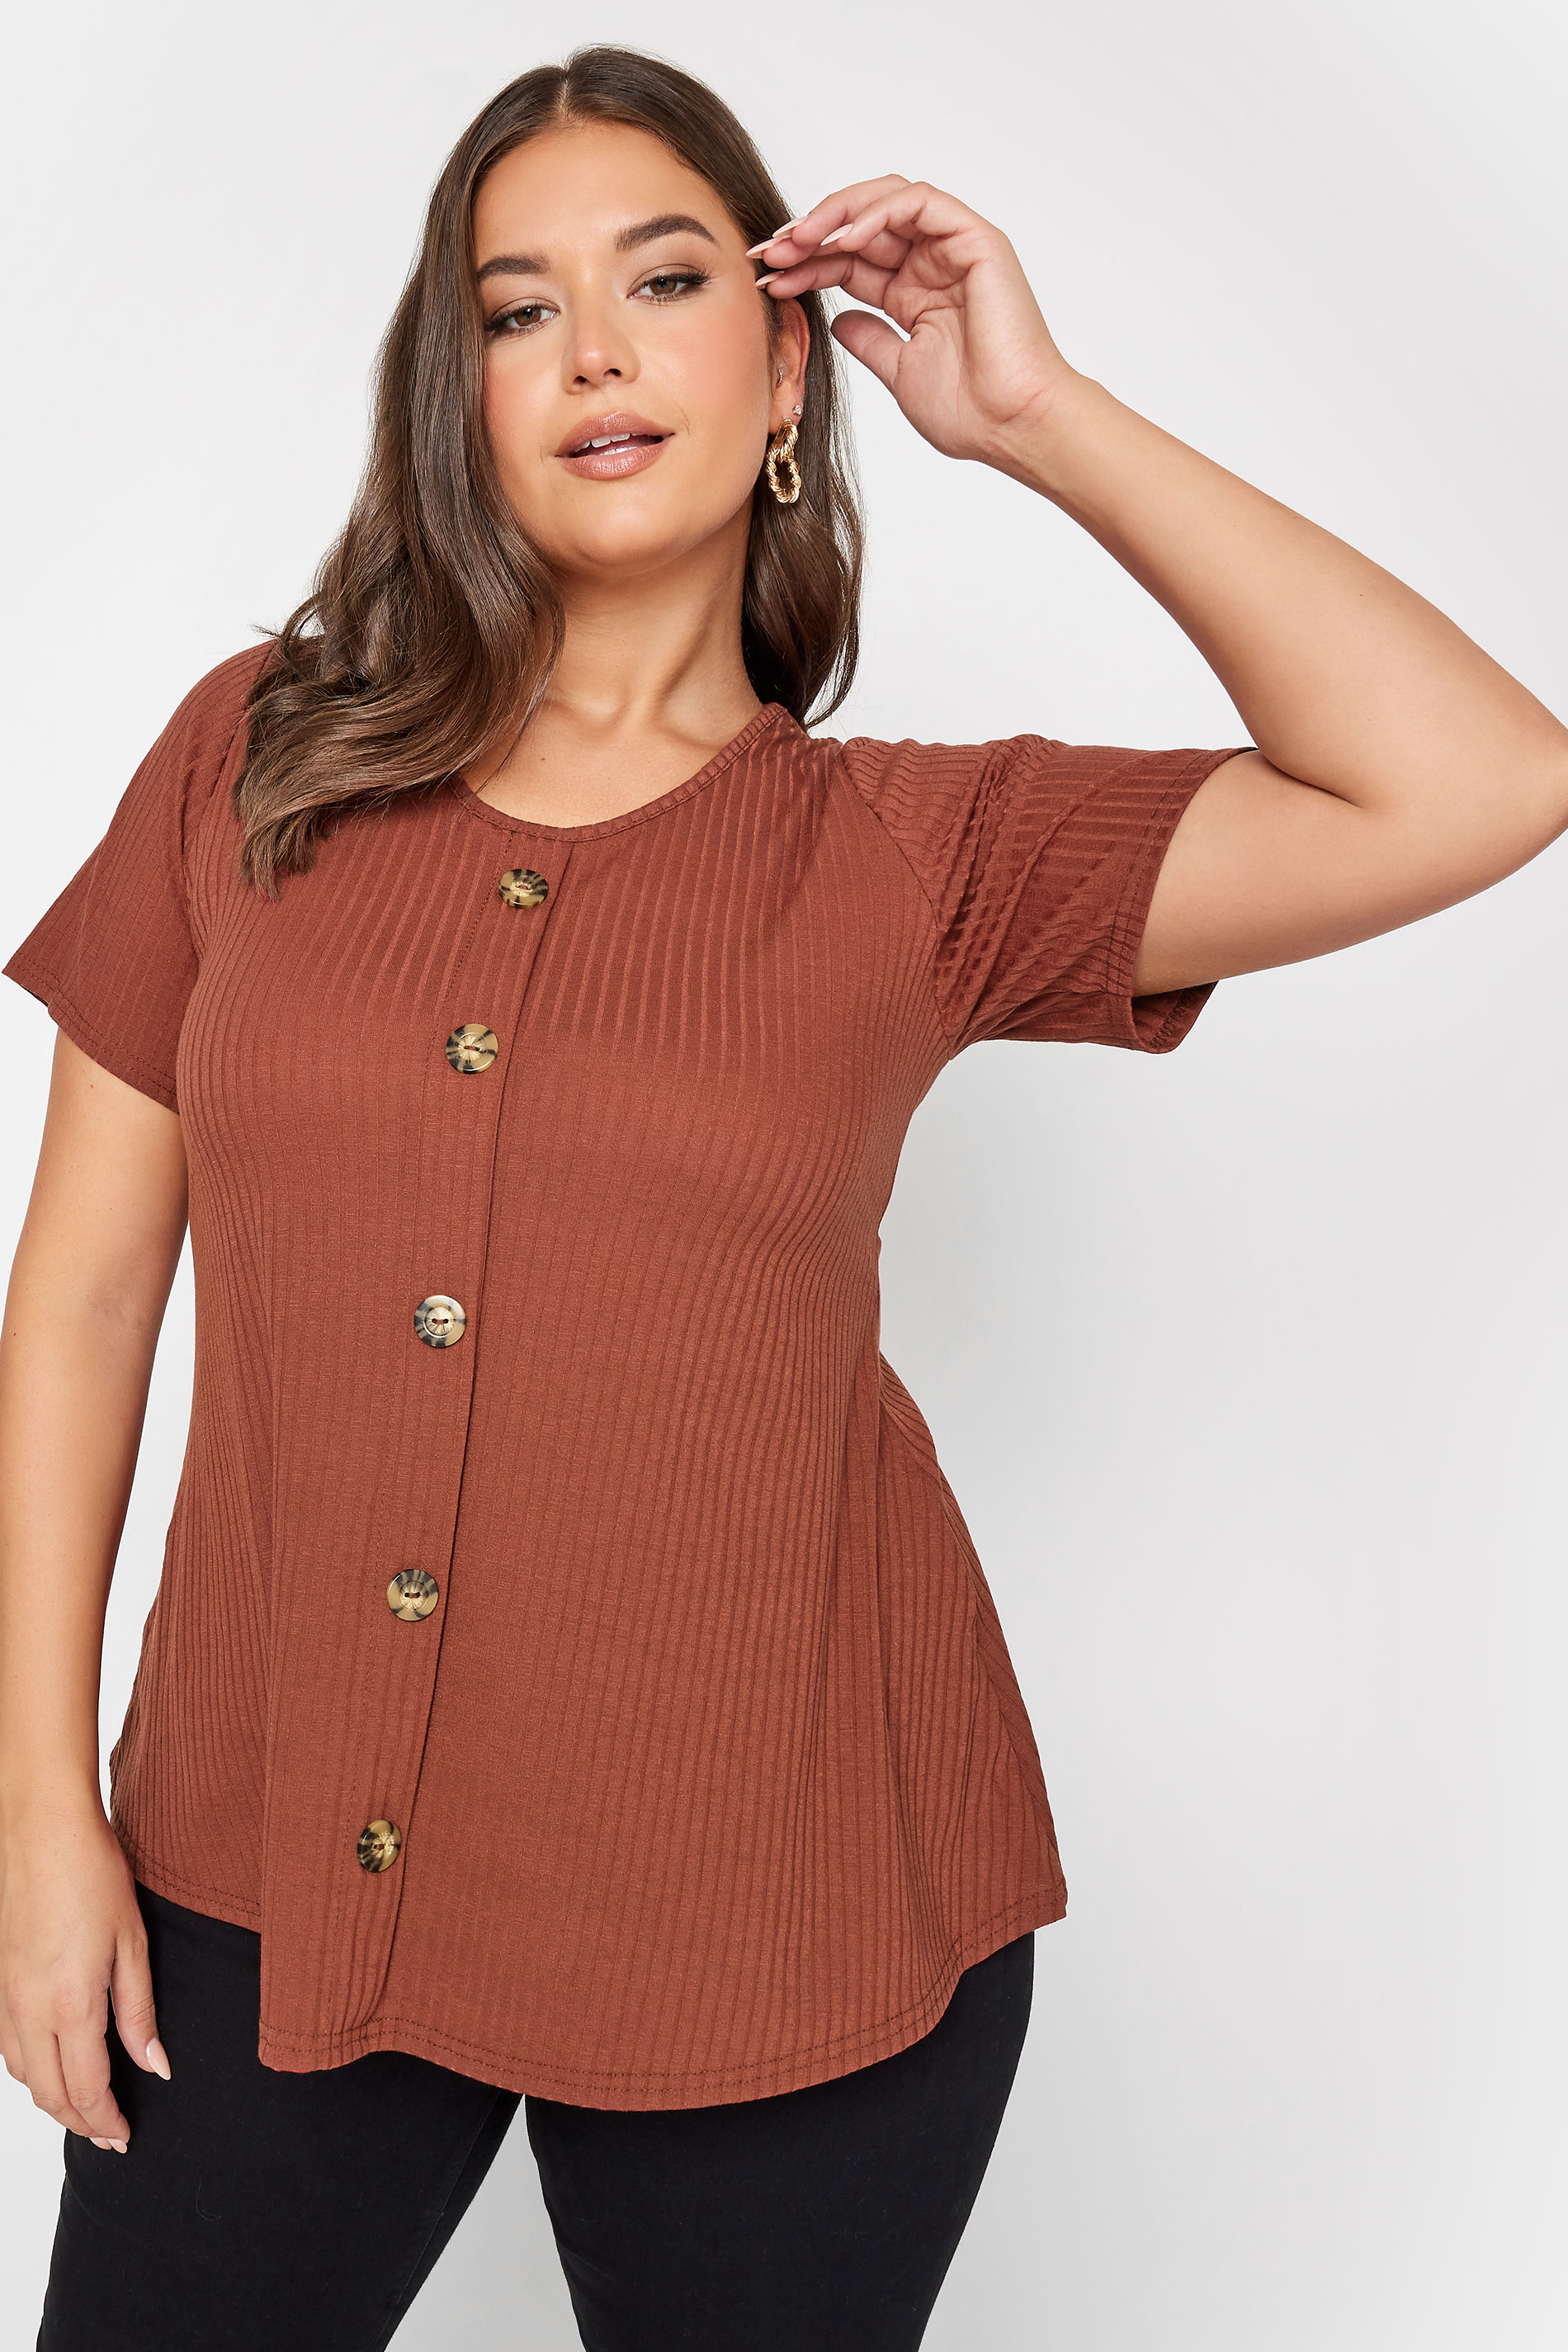 LIMITED COLLECTION 2 PACK Plus Size Curve Rust Orange & Black Ribbed Swing Tops | Yours Clothing  2